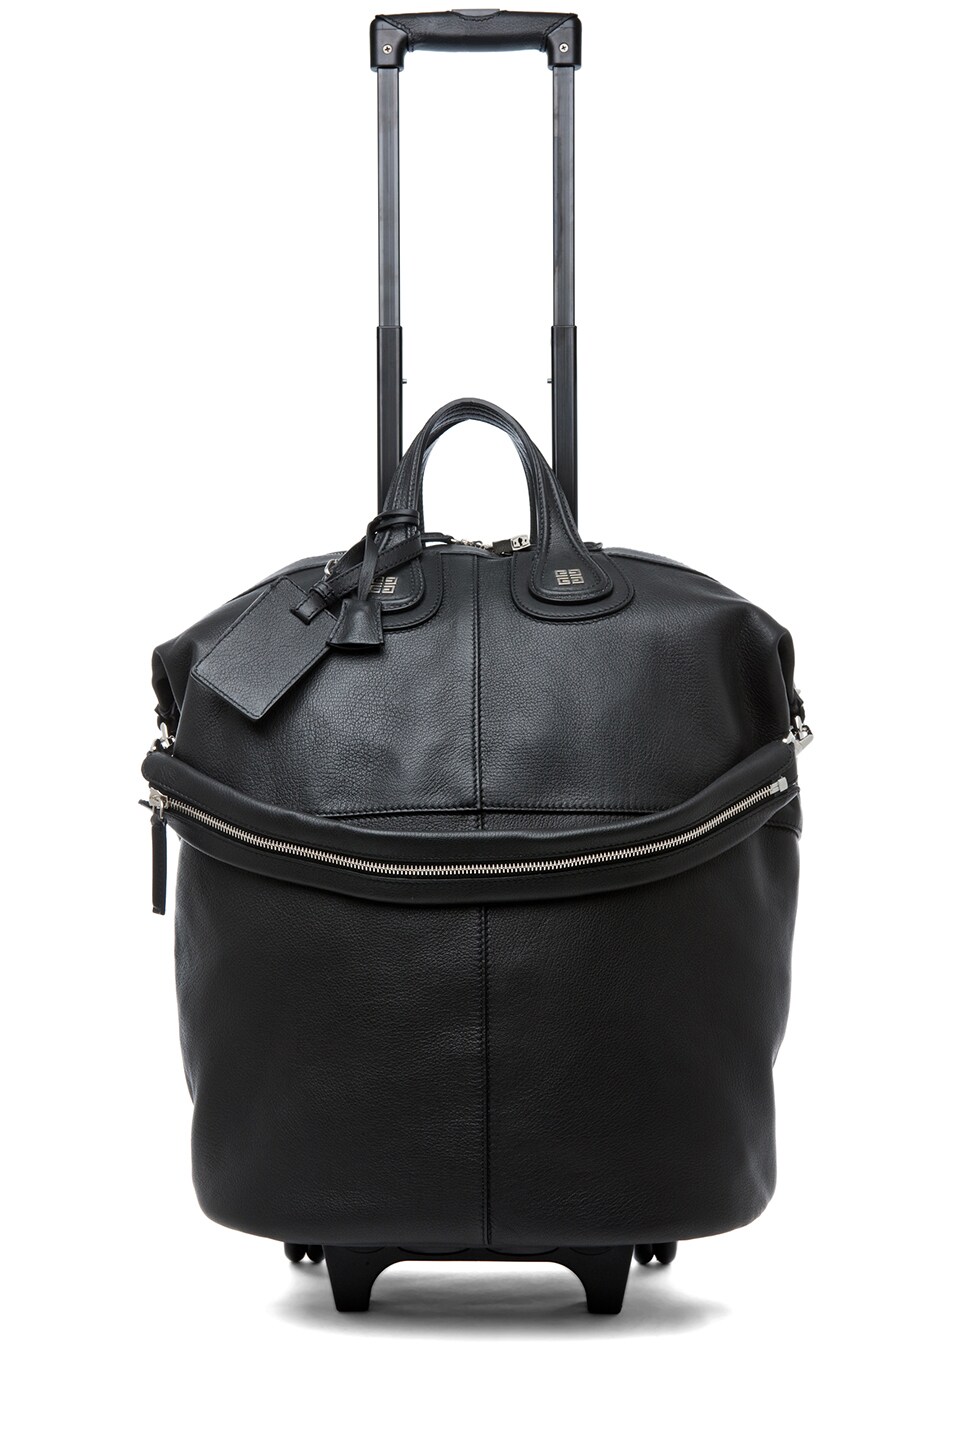 Givenchy Nightingale Carry-On Luggage in Black | FWRD